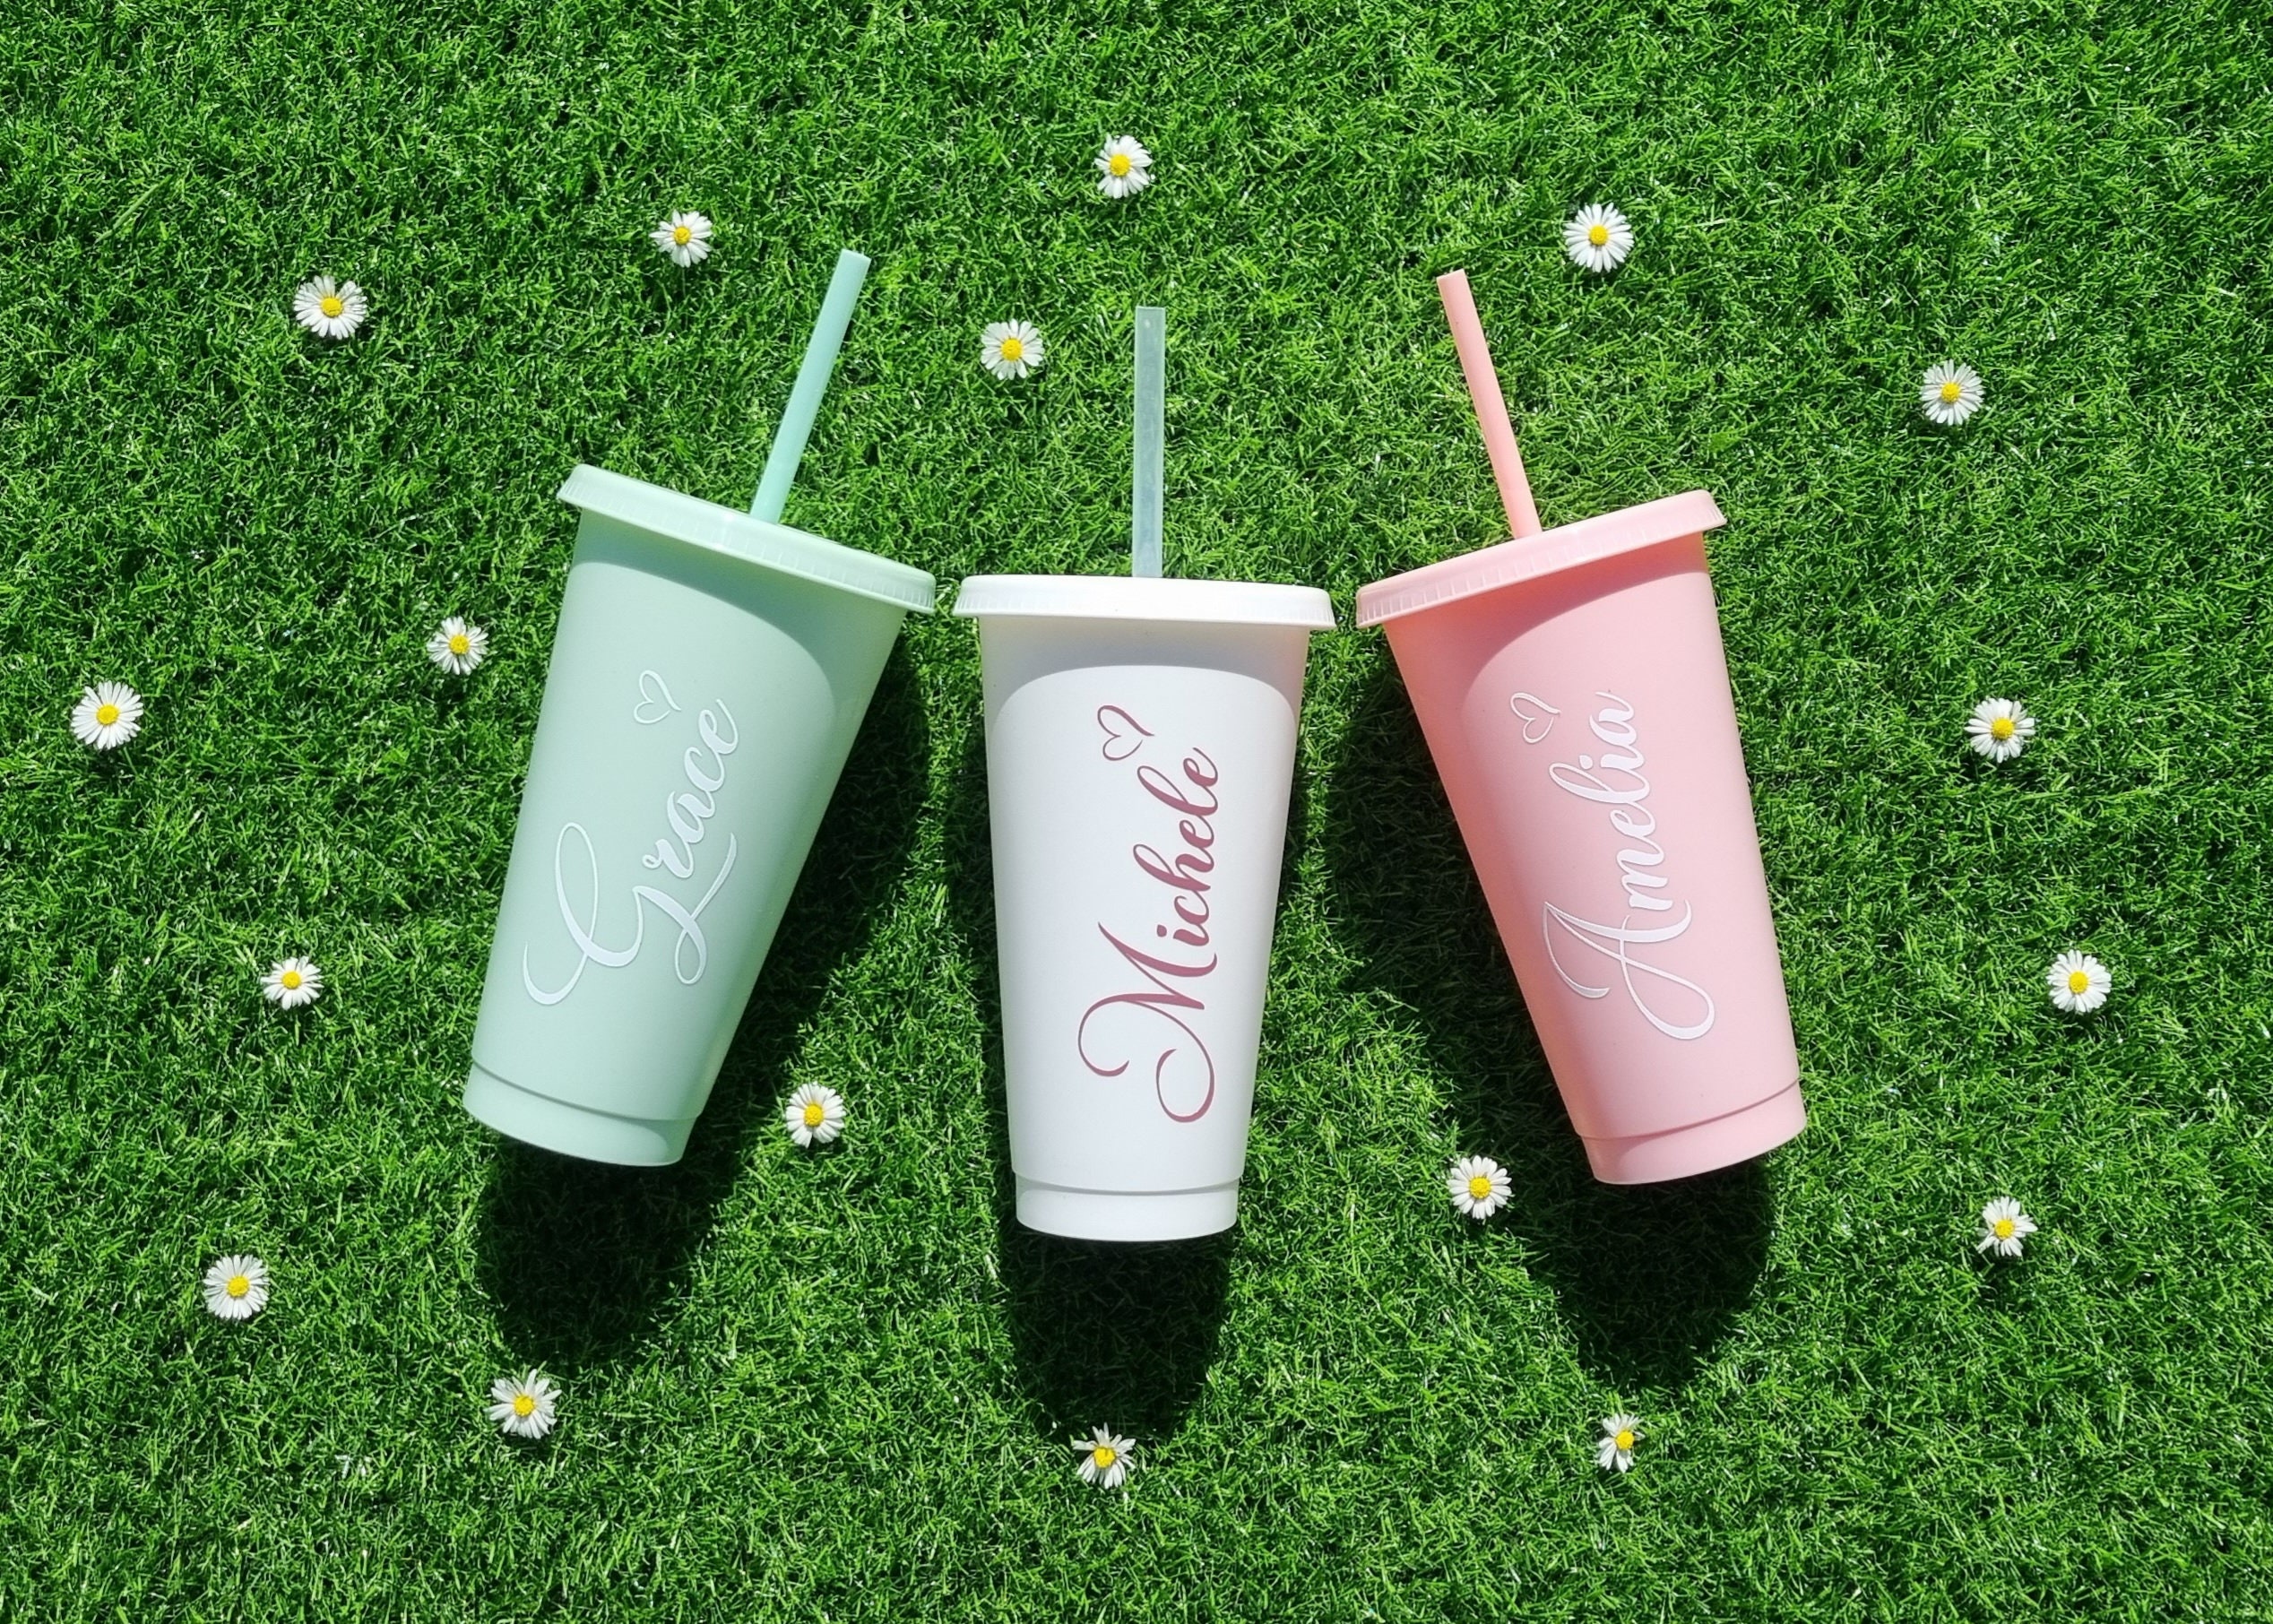 Personalised Cold Cup With Straw, Starbucks Inspired, Pastel